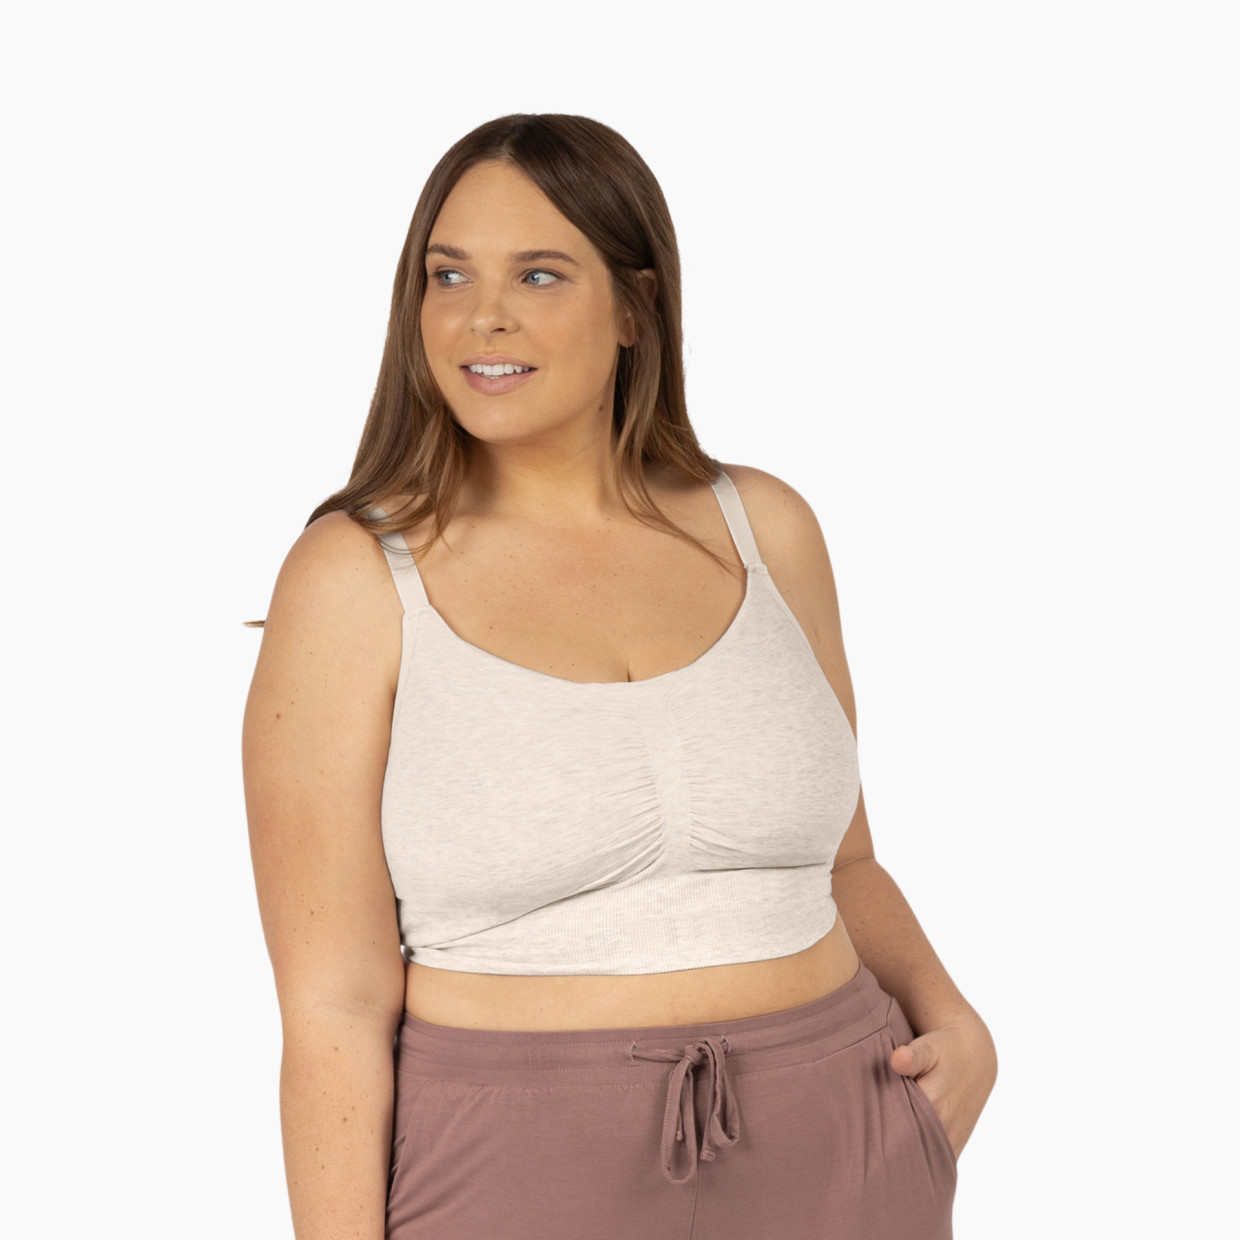 Kindred Bravely Sublime Bamboo Hands-Free Pumping Lounge & Sleep Bra - Oatmeal Heather, Small.